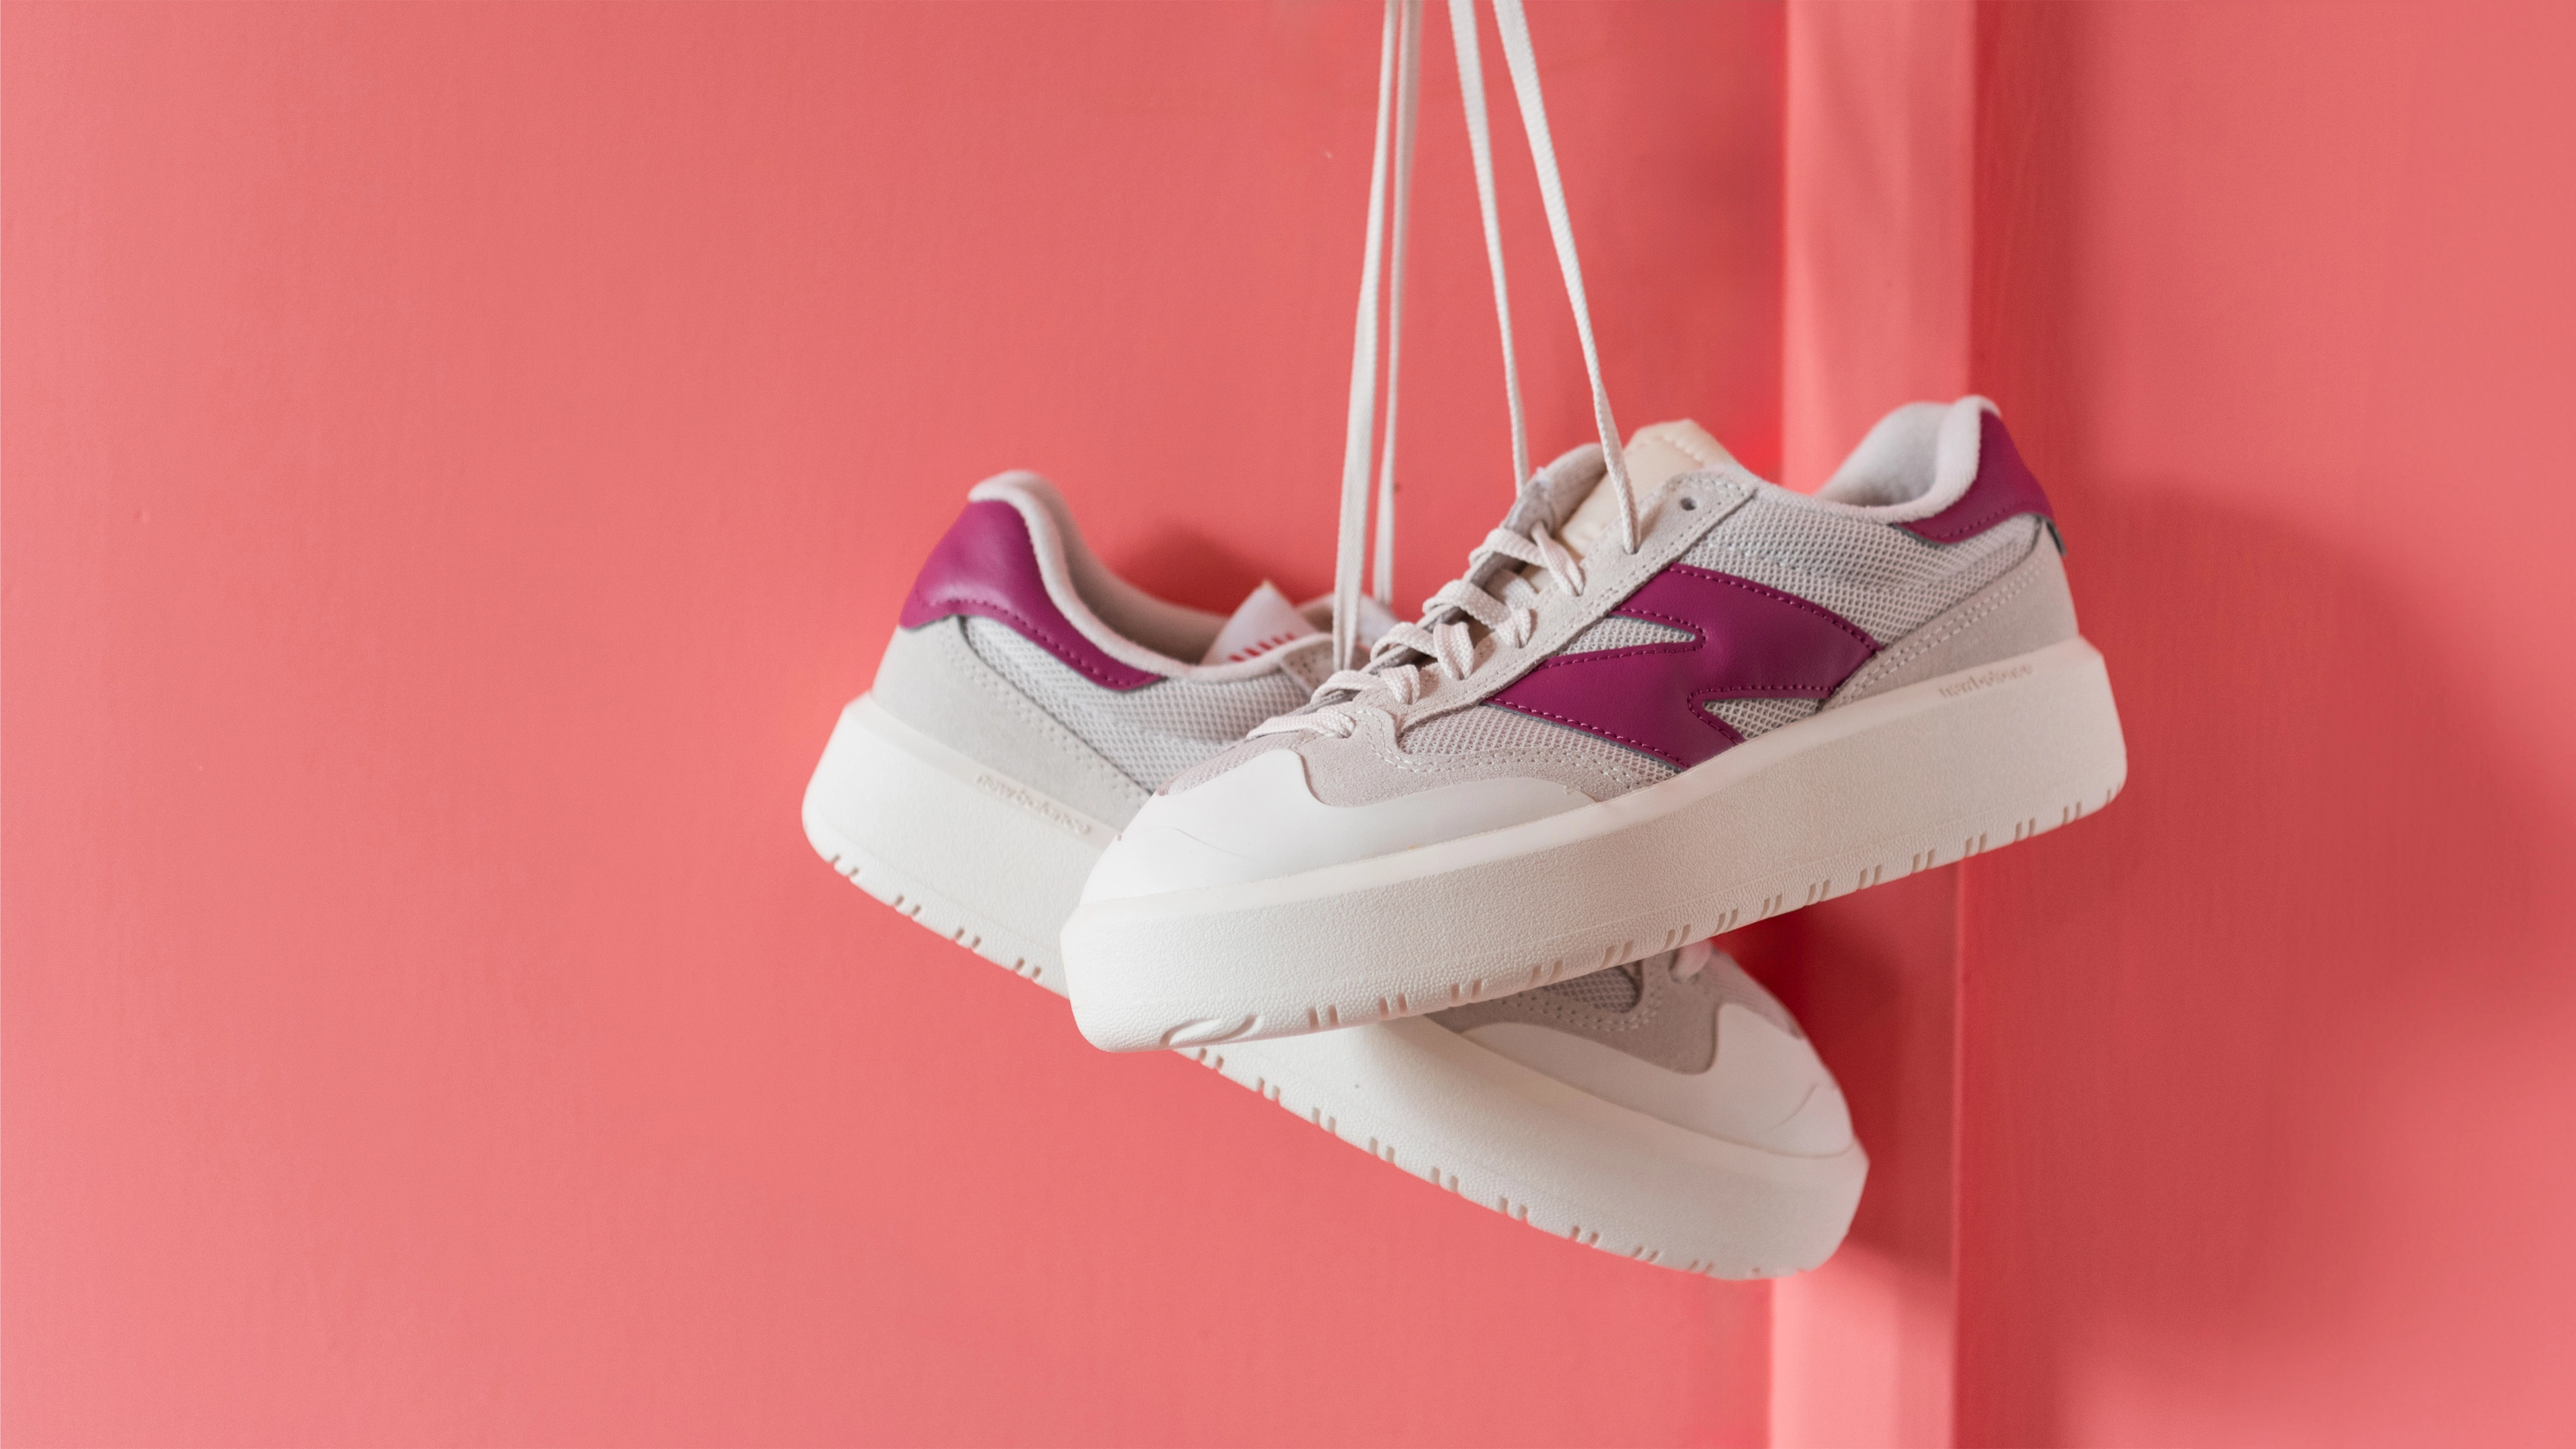 The New Balance CT302 "Moonbeam Pink" Is Giving Barbiecore Vibes